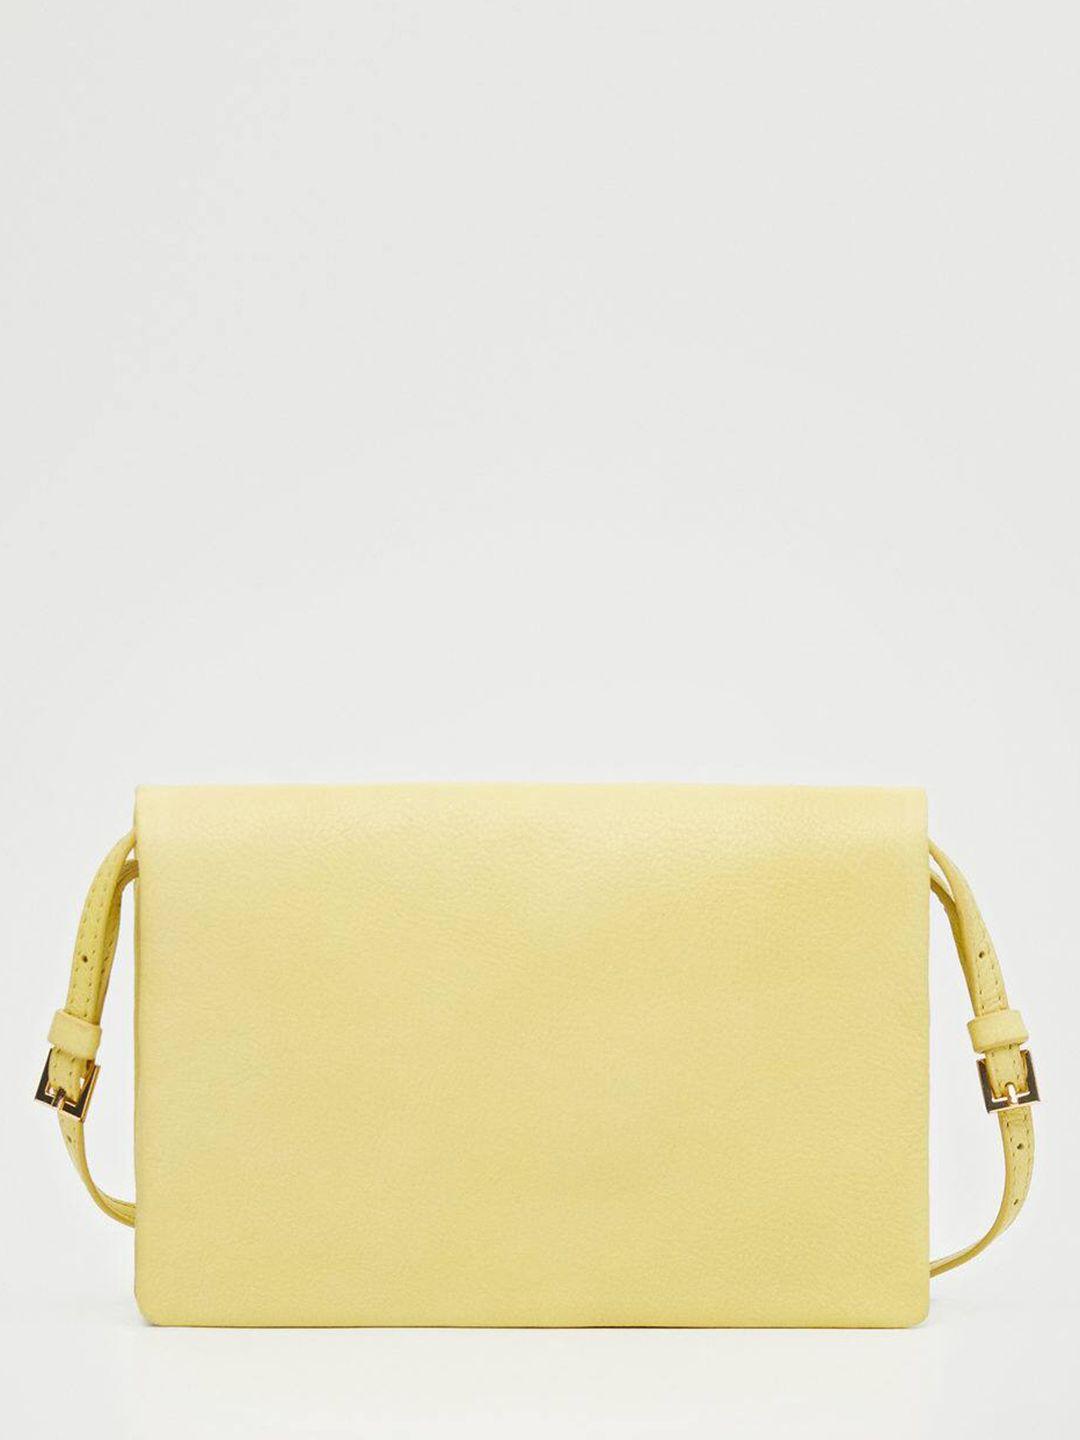 mango lime green solid leather structured sling bag with non-detachable sling strap